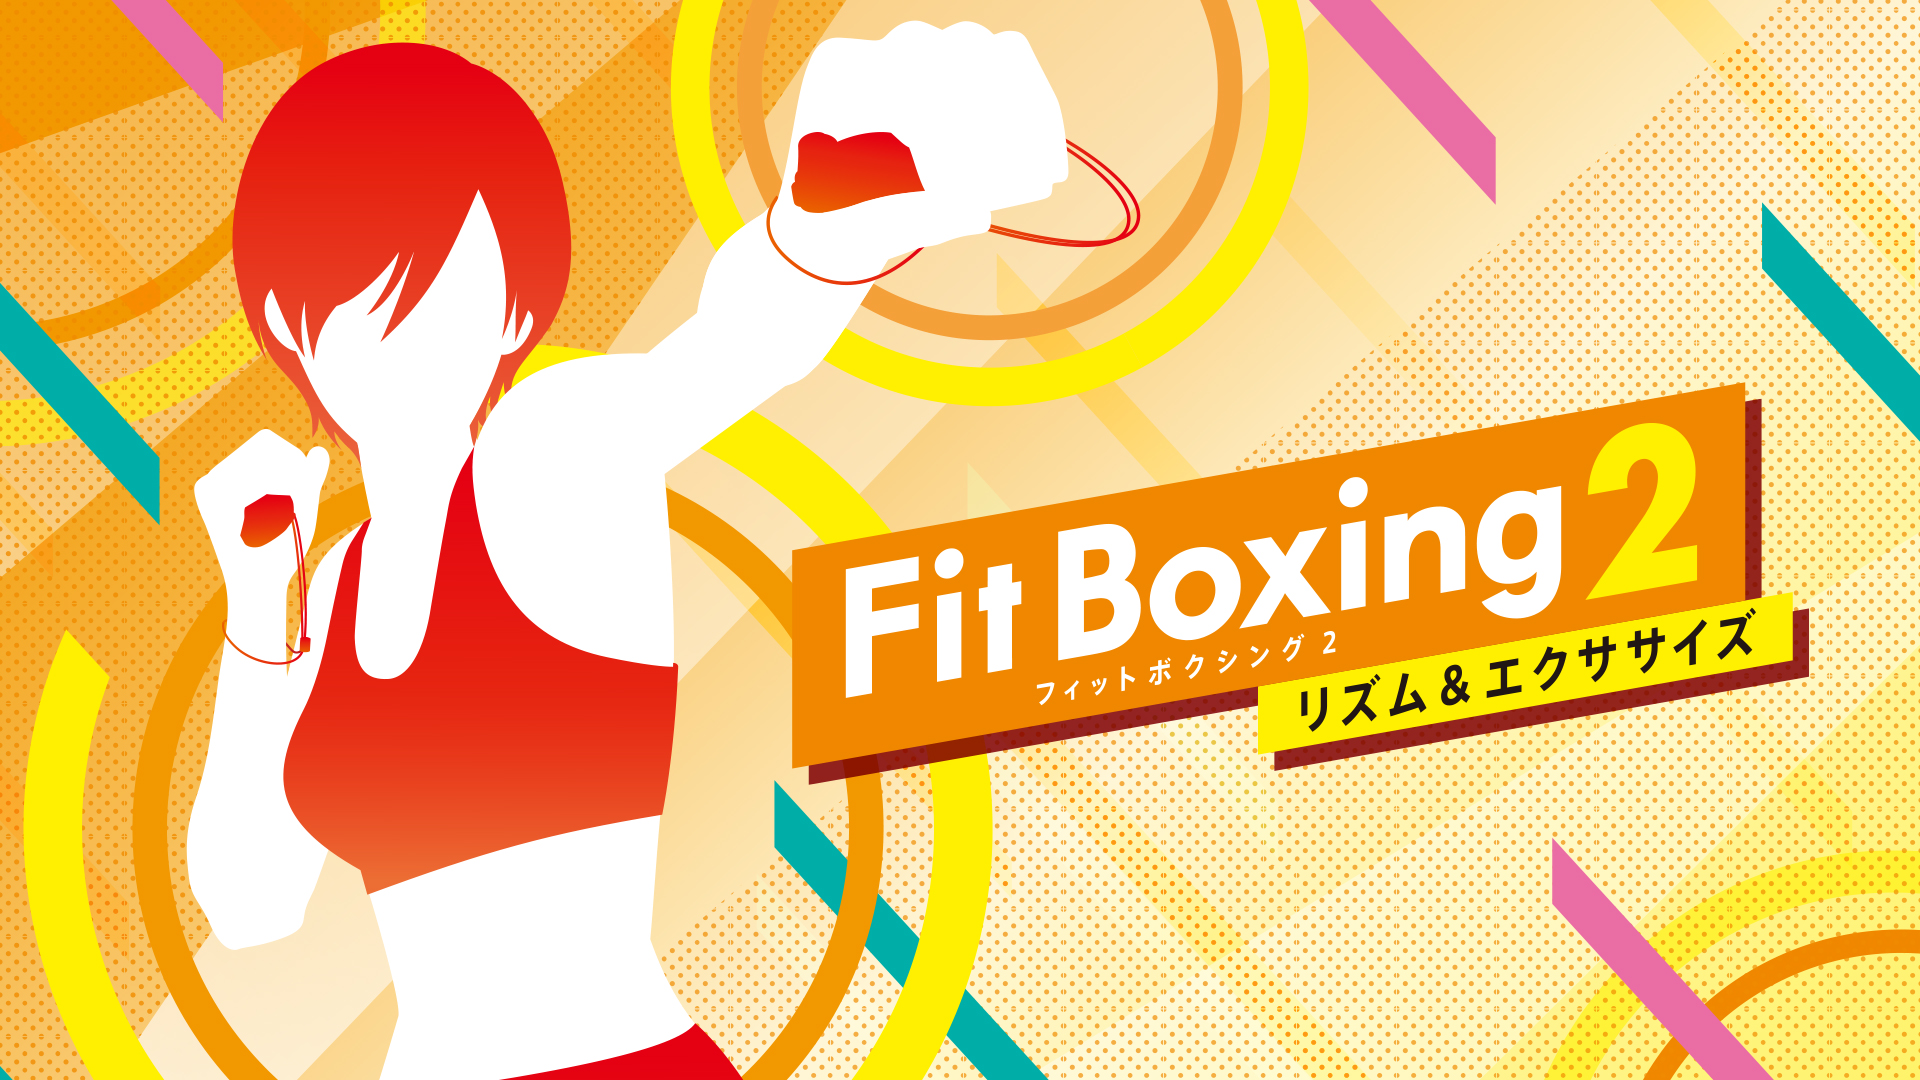 Nintendo Switchソフト「Fit Boxing 2 -リズム＆エクササイズ-」発売の ...